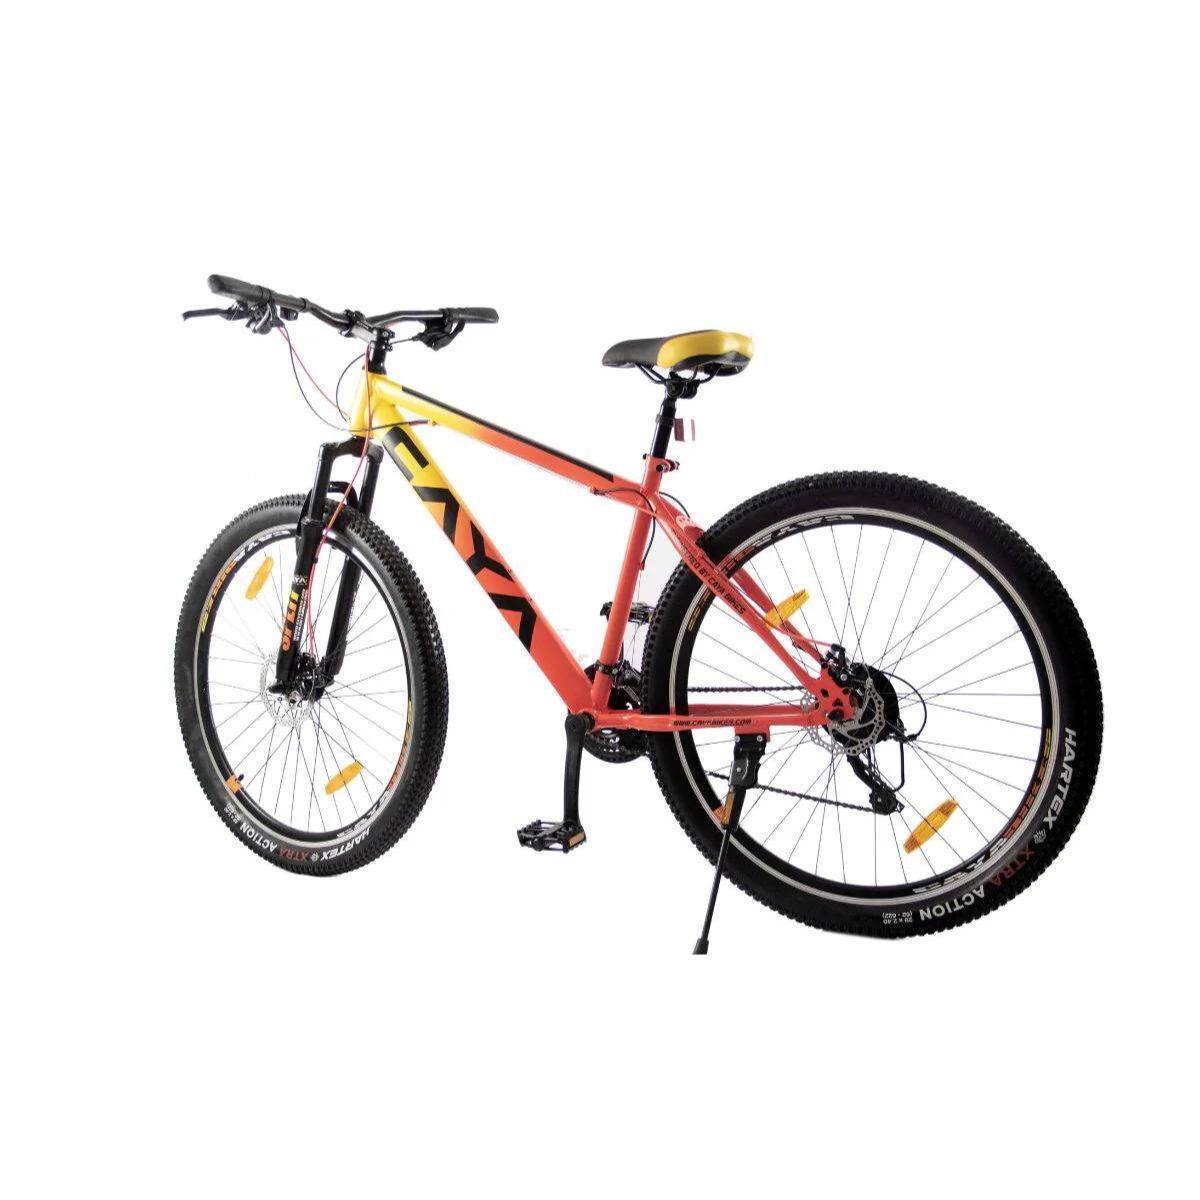 CAYA Split 27.5 MTB Cycle with Disc Brakes & Suspension 21 Speed Microshift